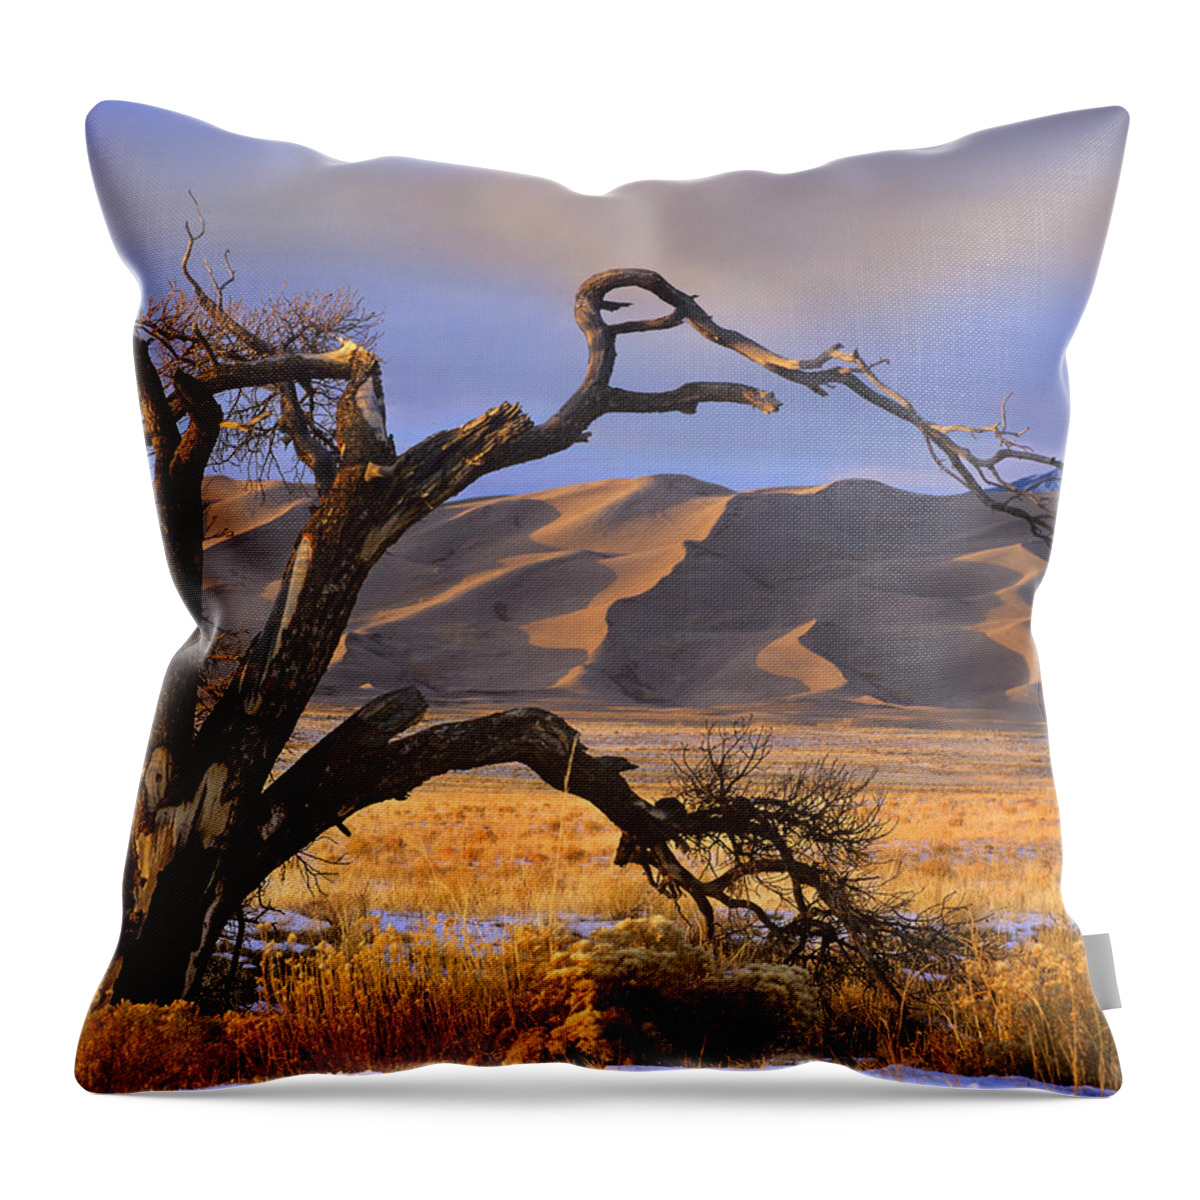 00176731 Throw Pillow featuring the photograph Grasslands And Dunes Great Sand Dunes by Tim Fitzharris